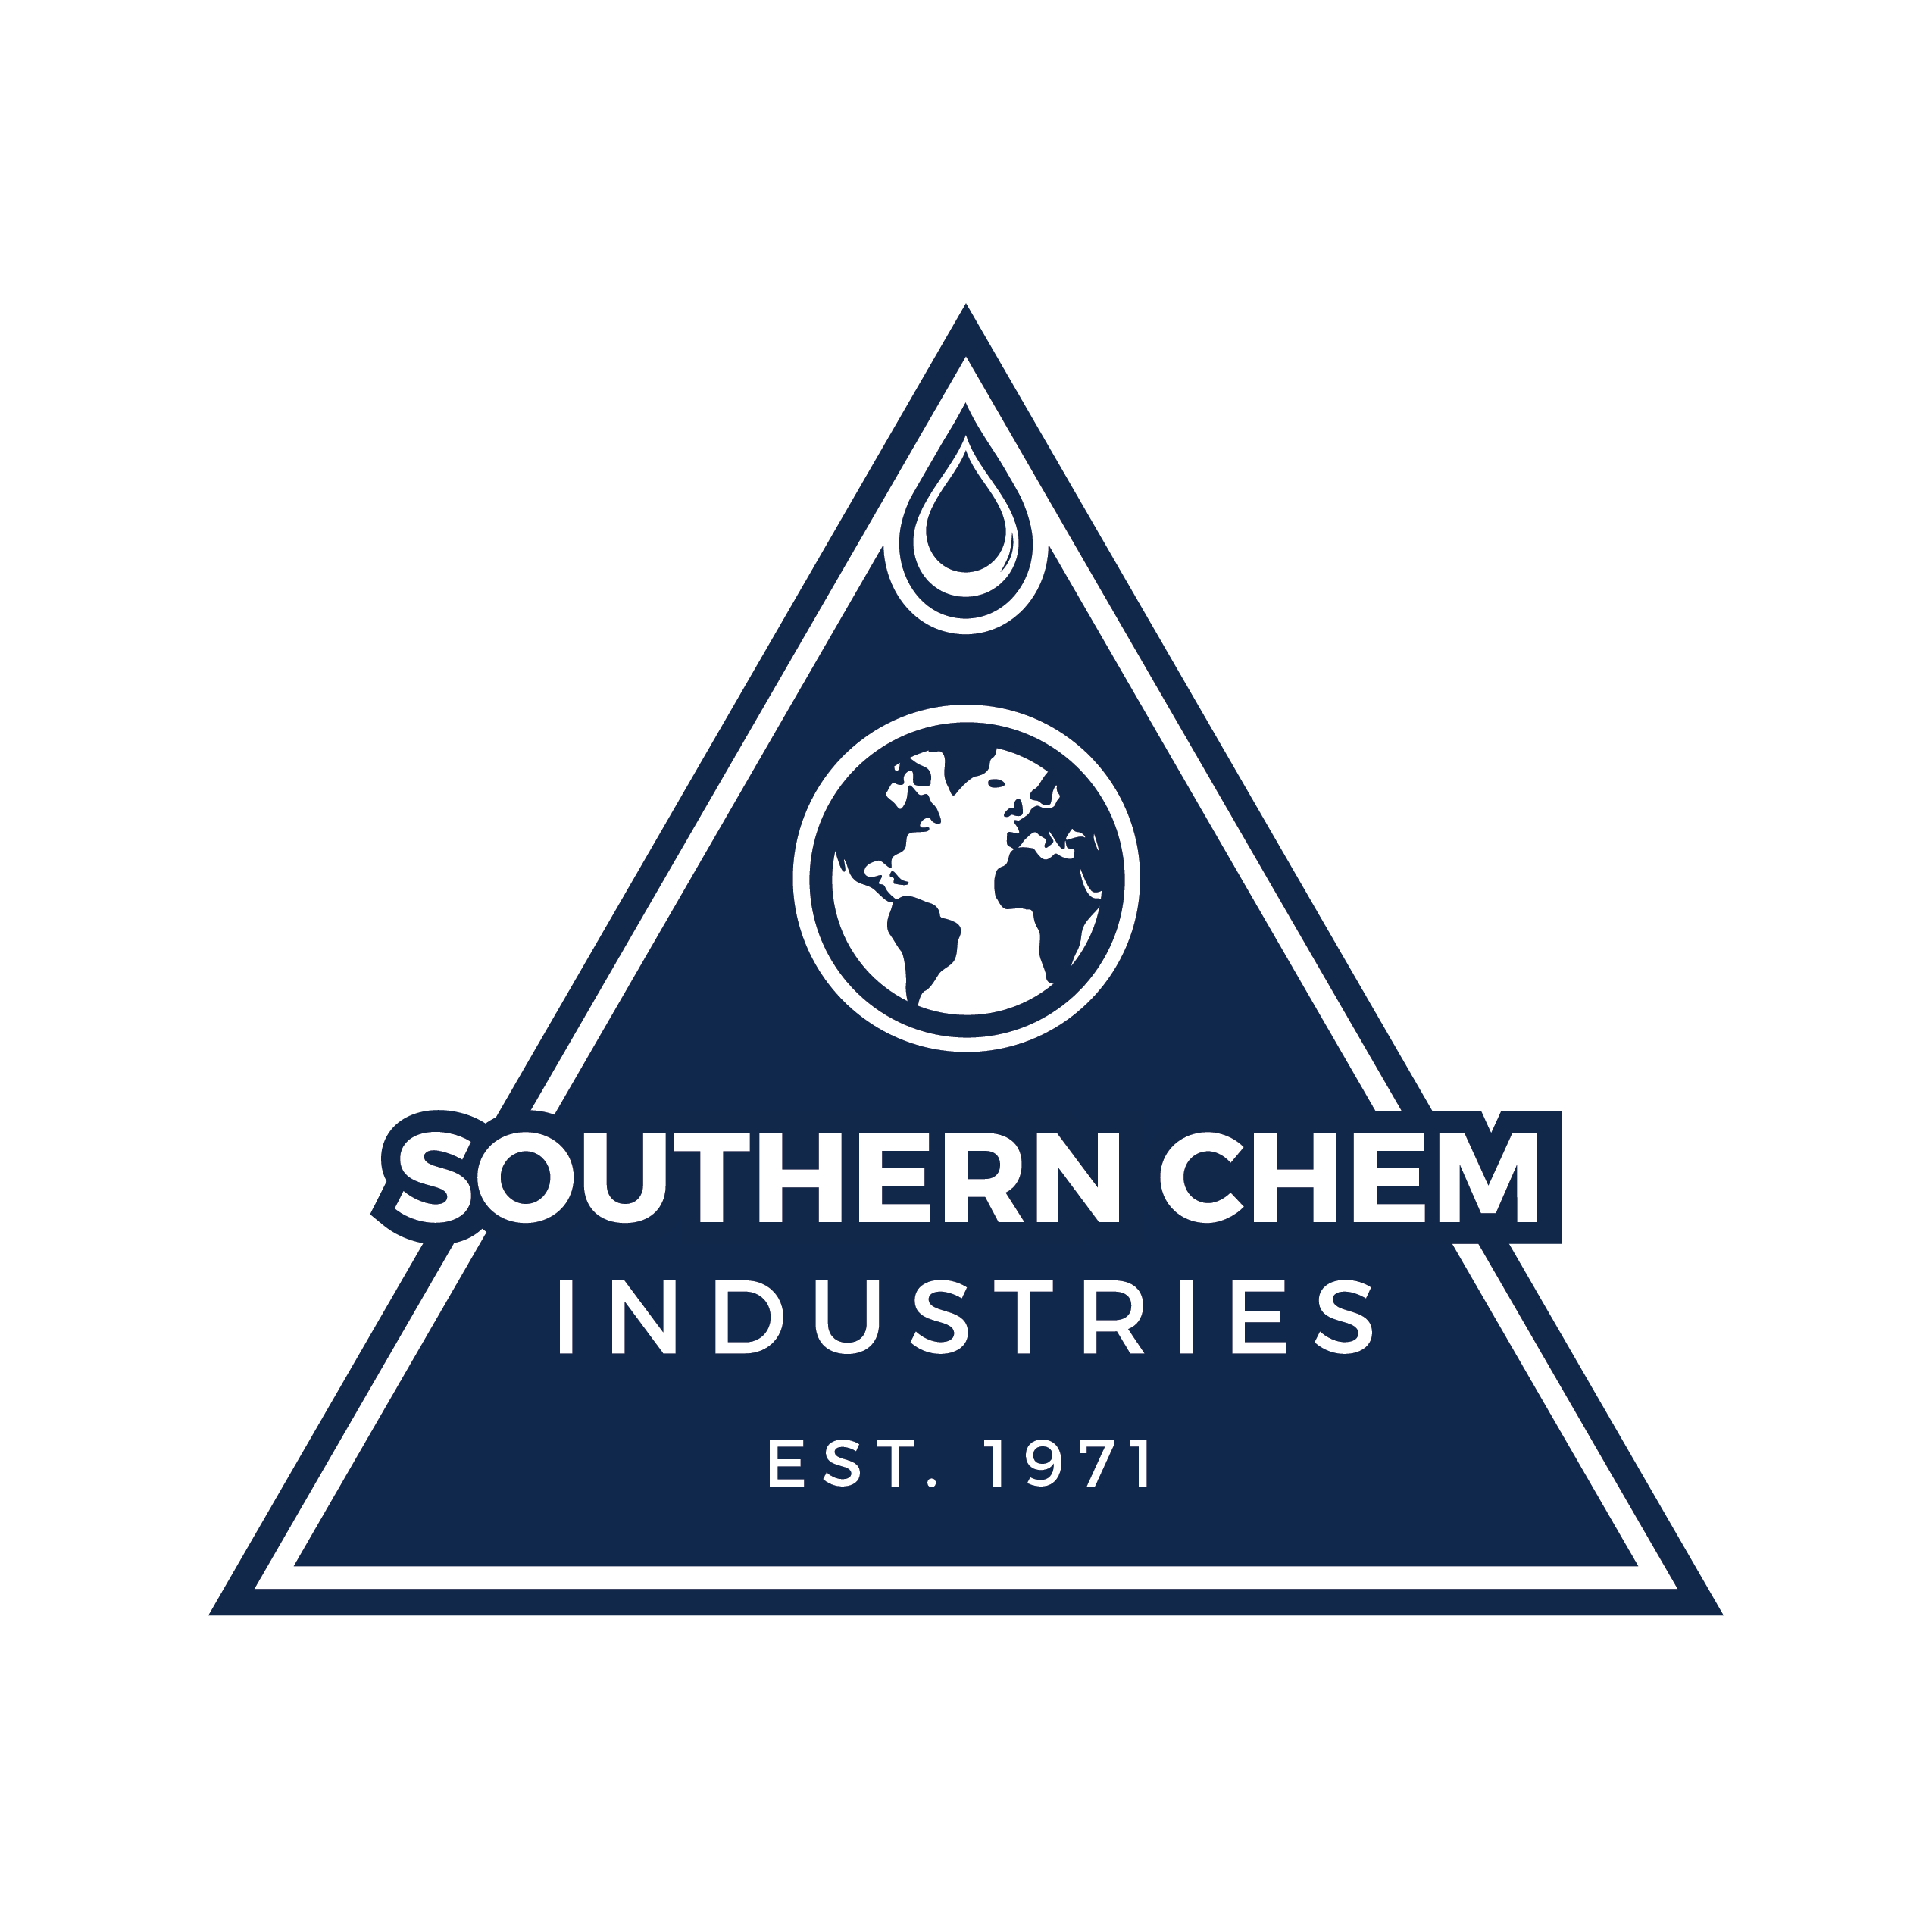 Southern Chem Industries